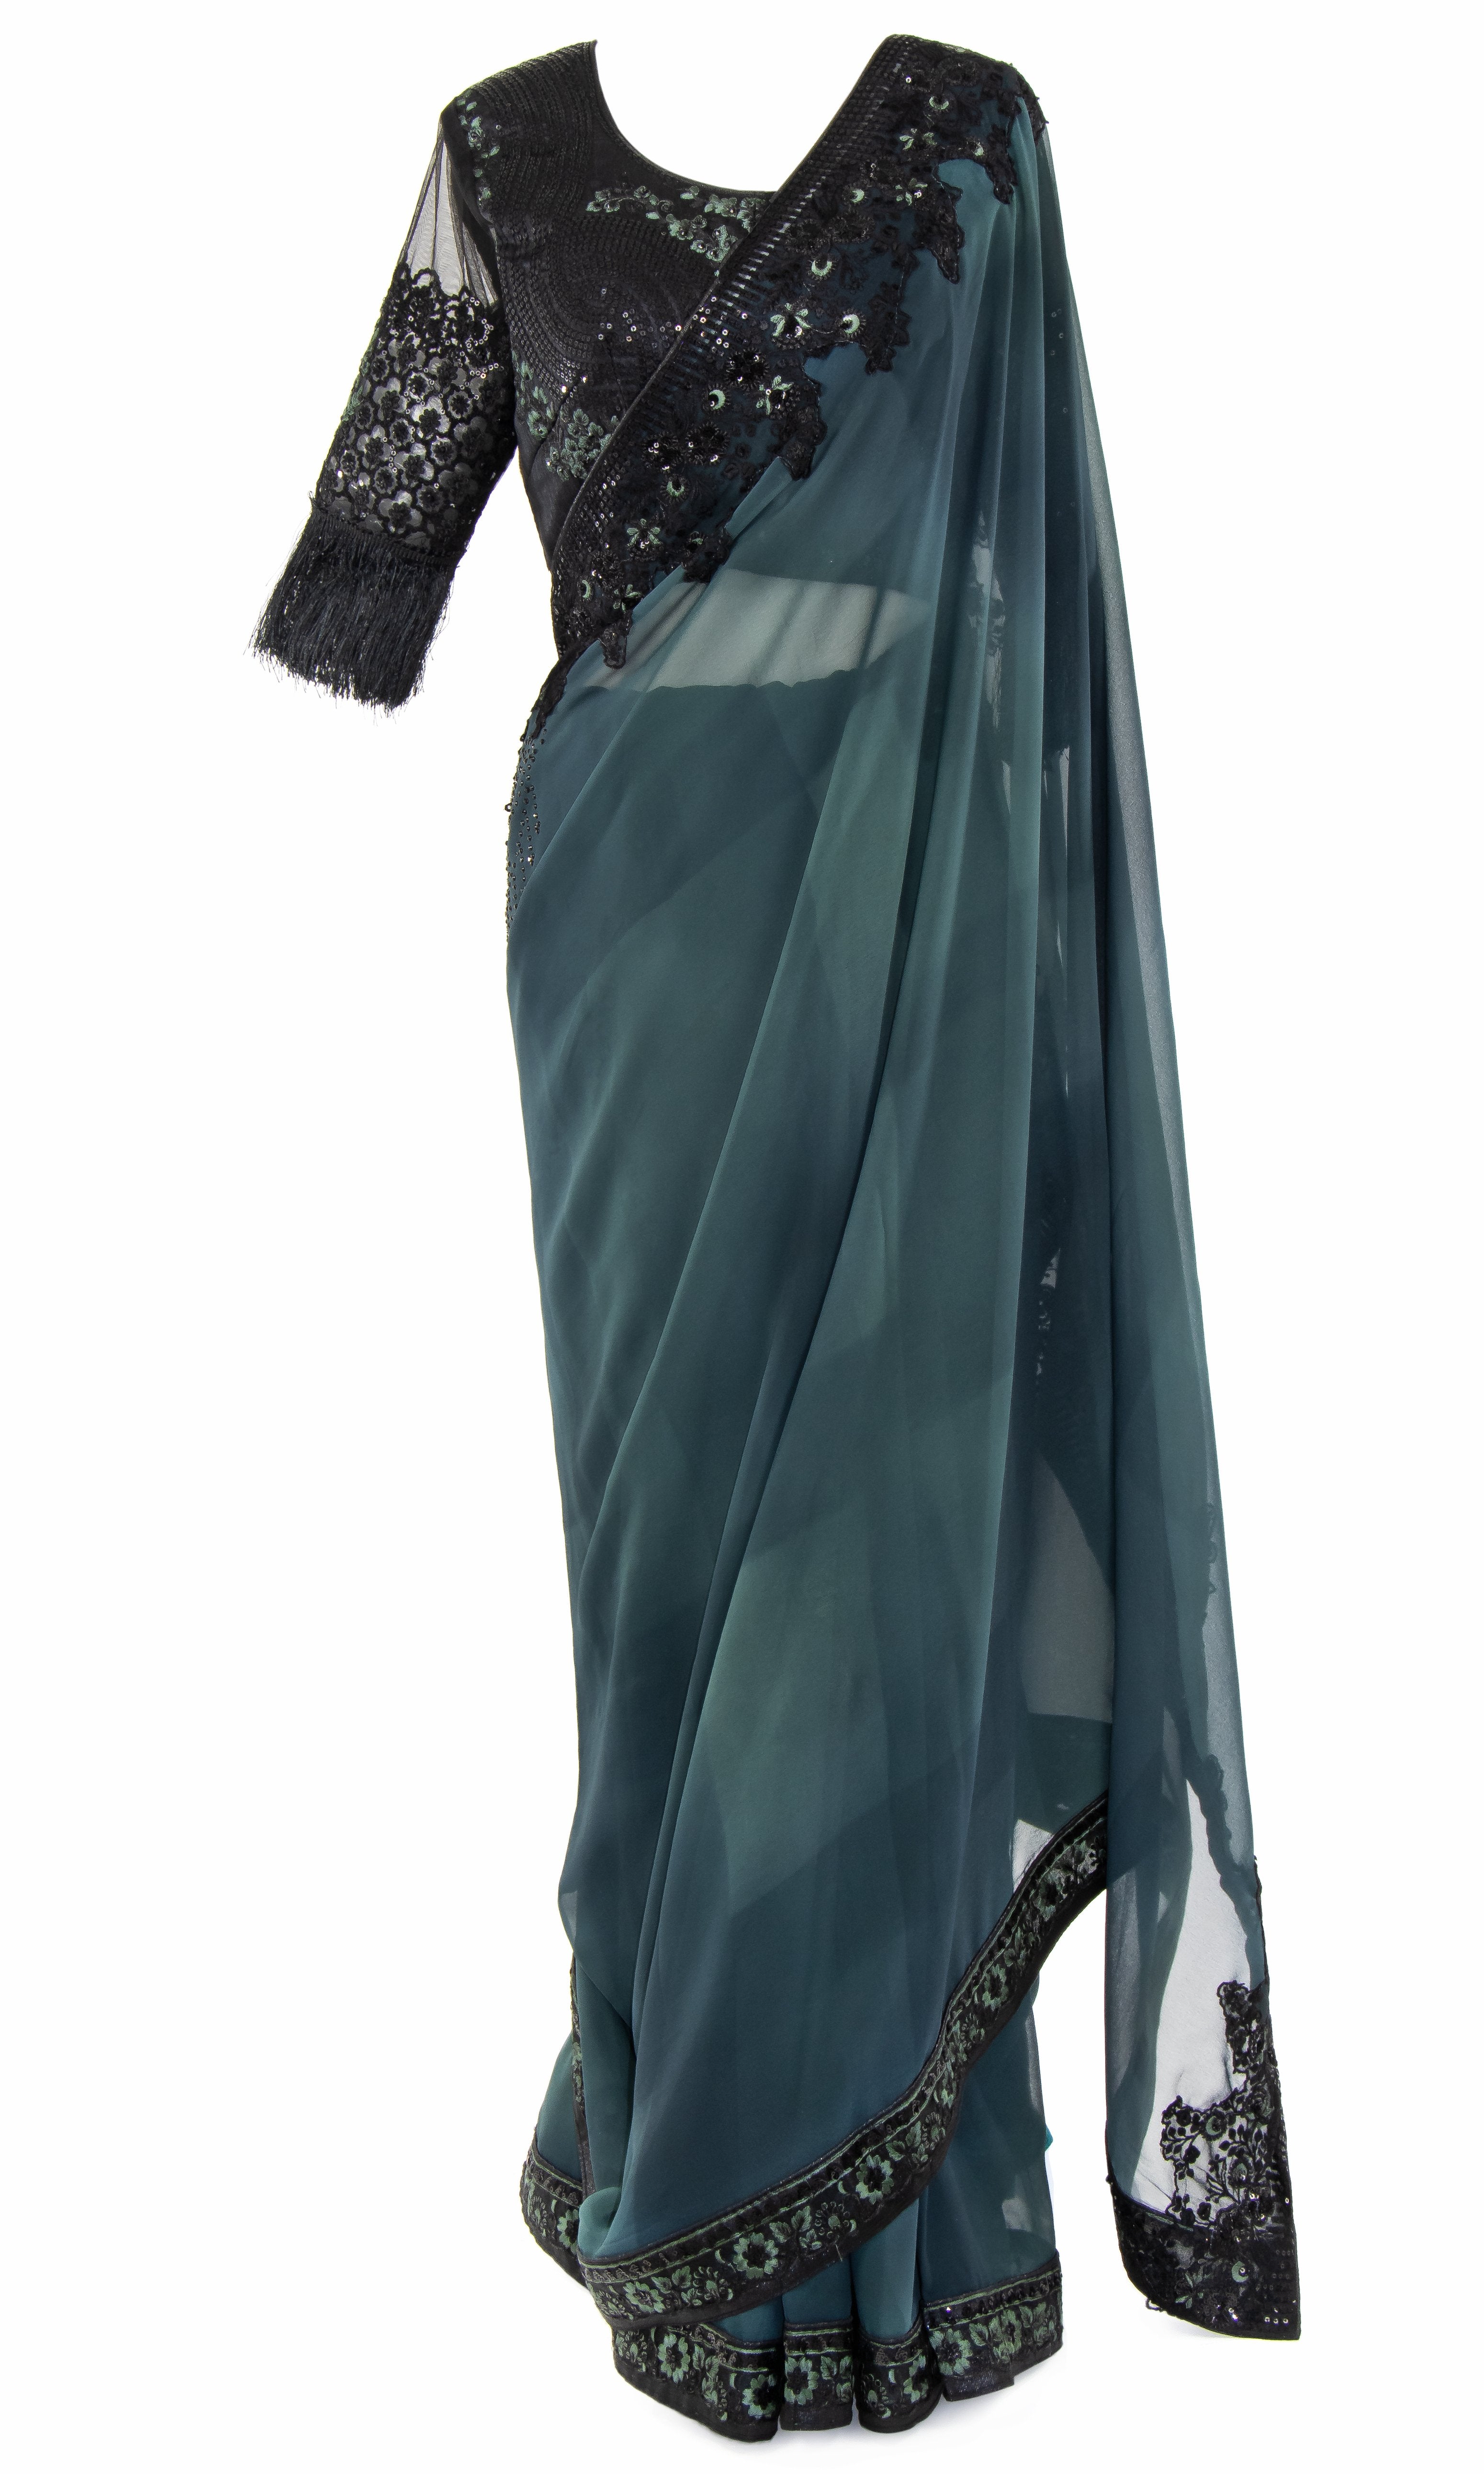 Teal printed Saree with Black sequined top & stunning black embellished border for contrast